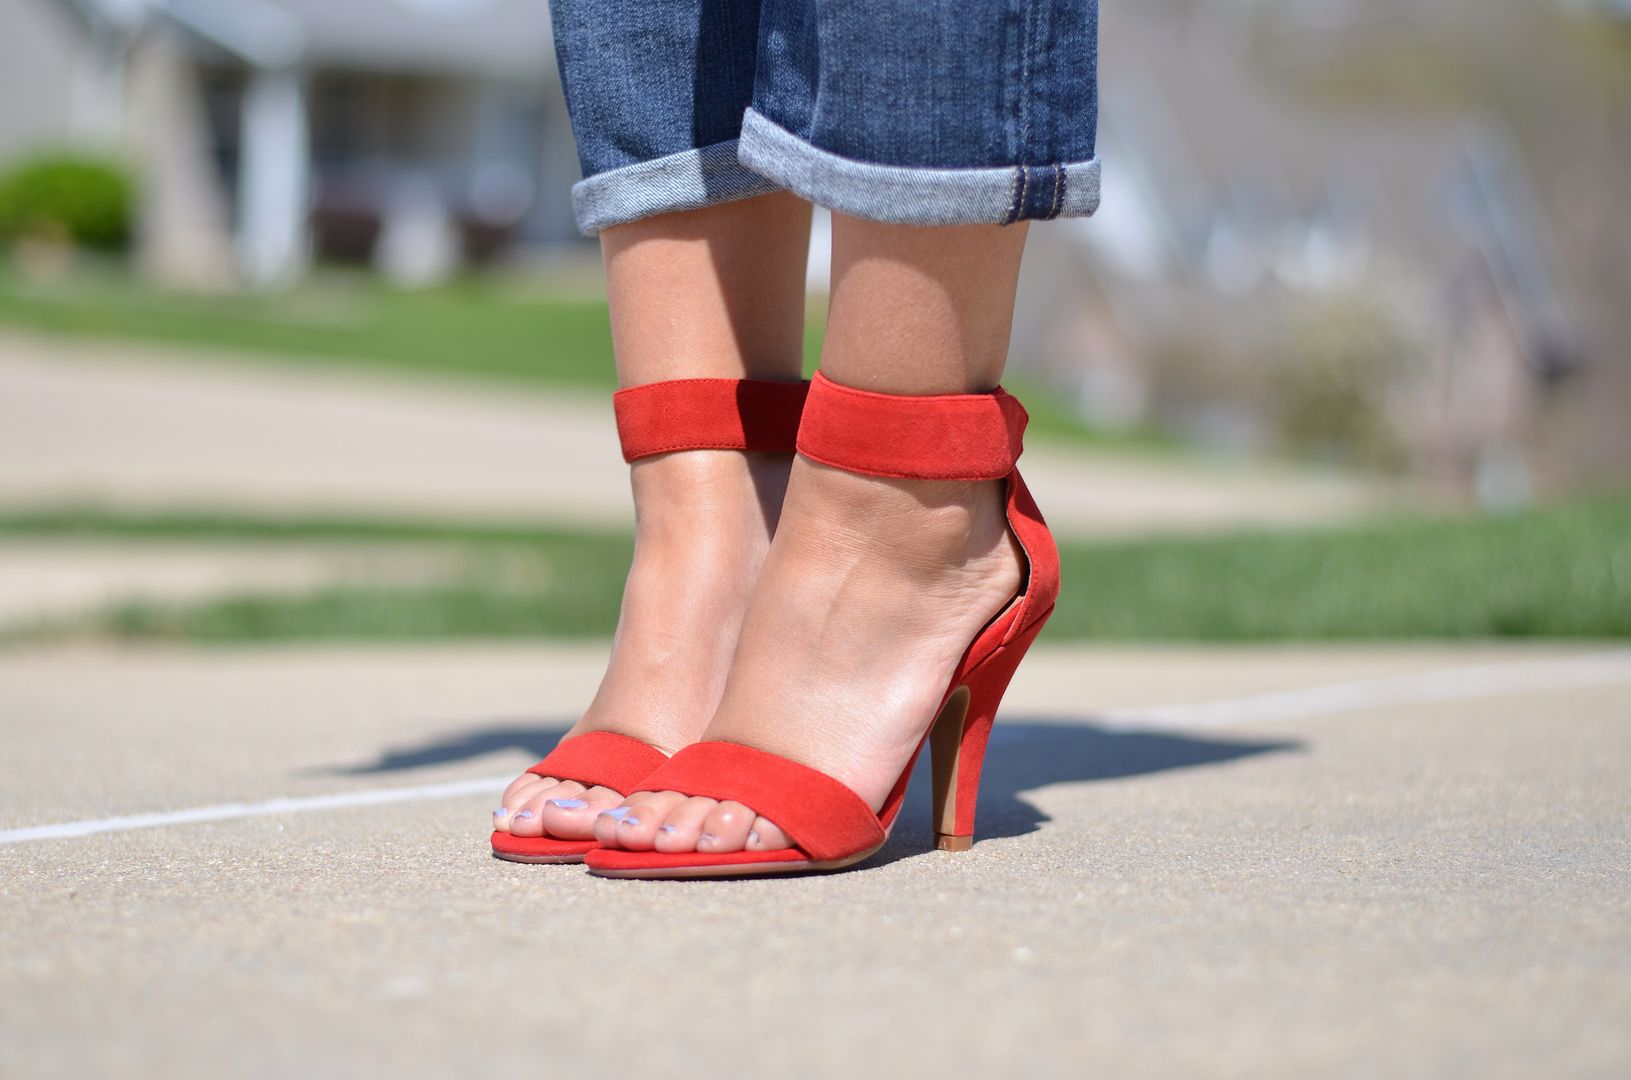 More Pieces of Me | St. Louis Fashion Blog: Manic Monday: The red sandal